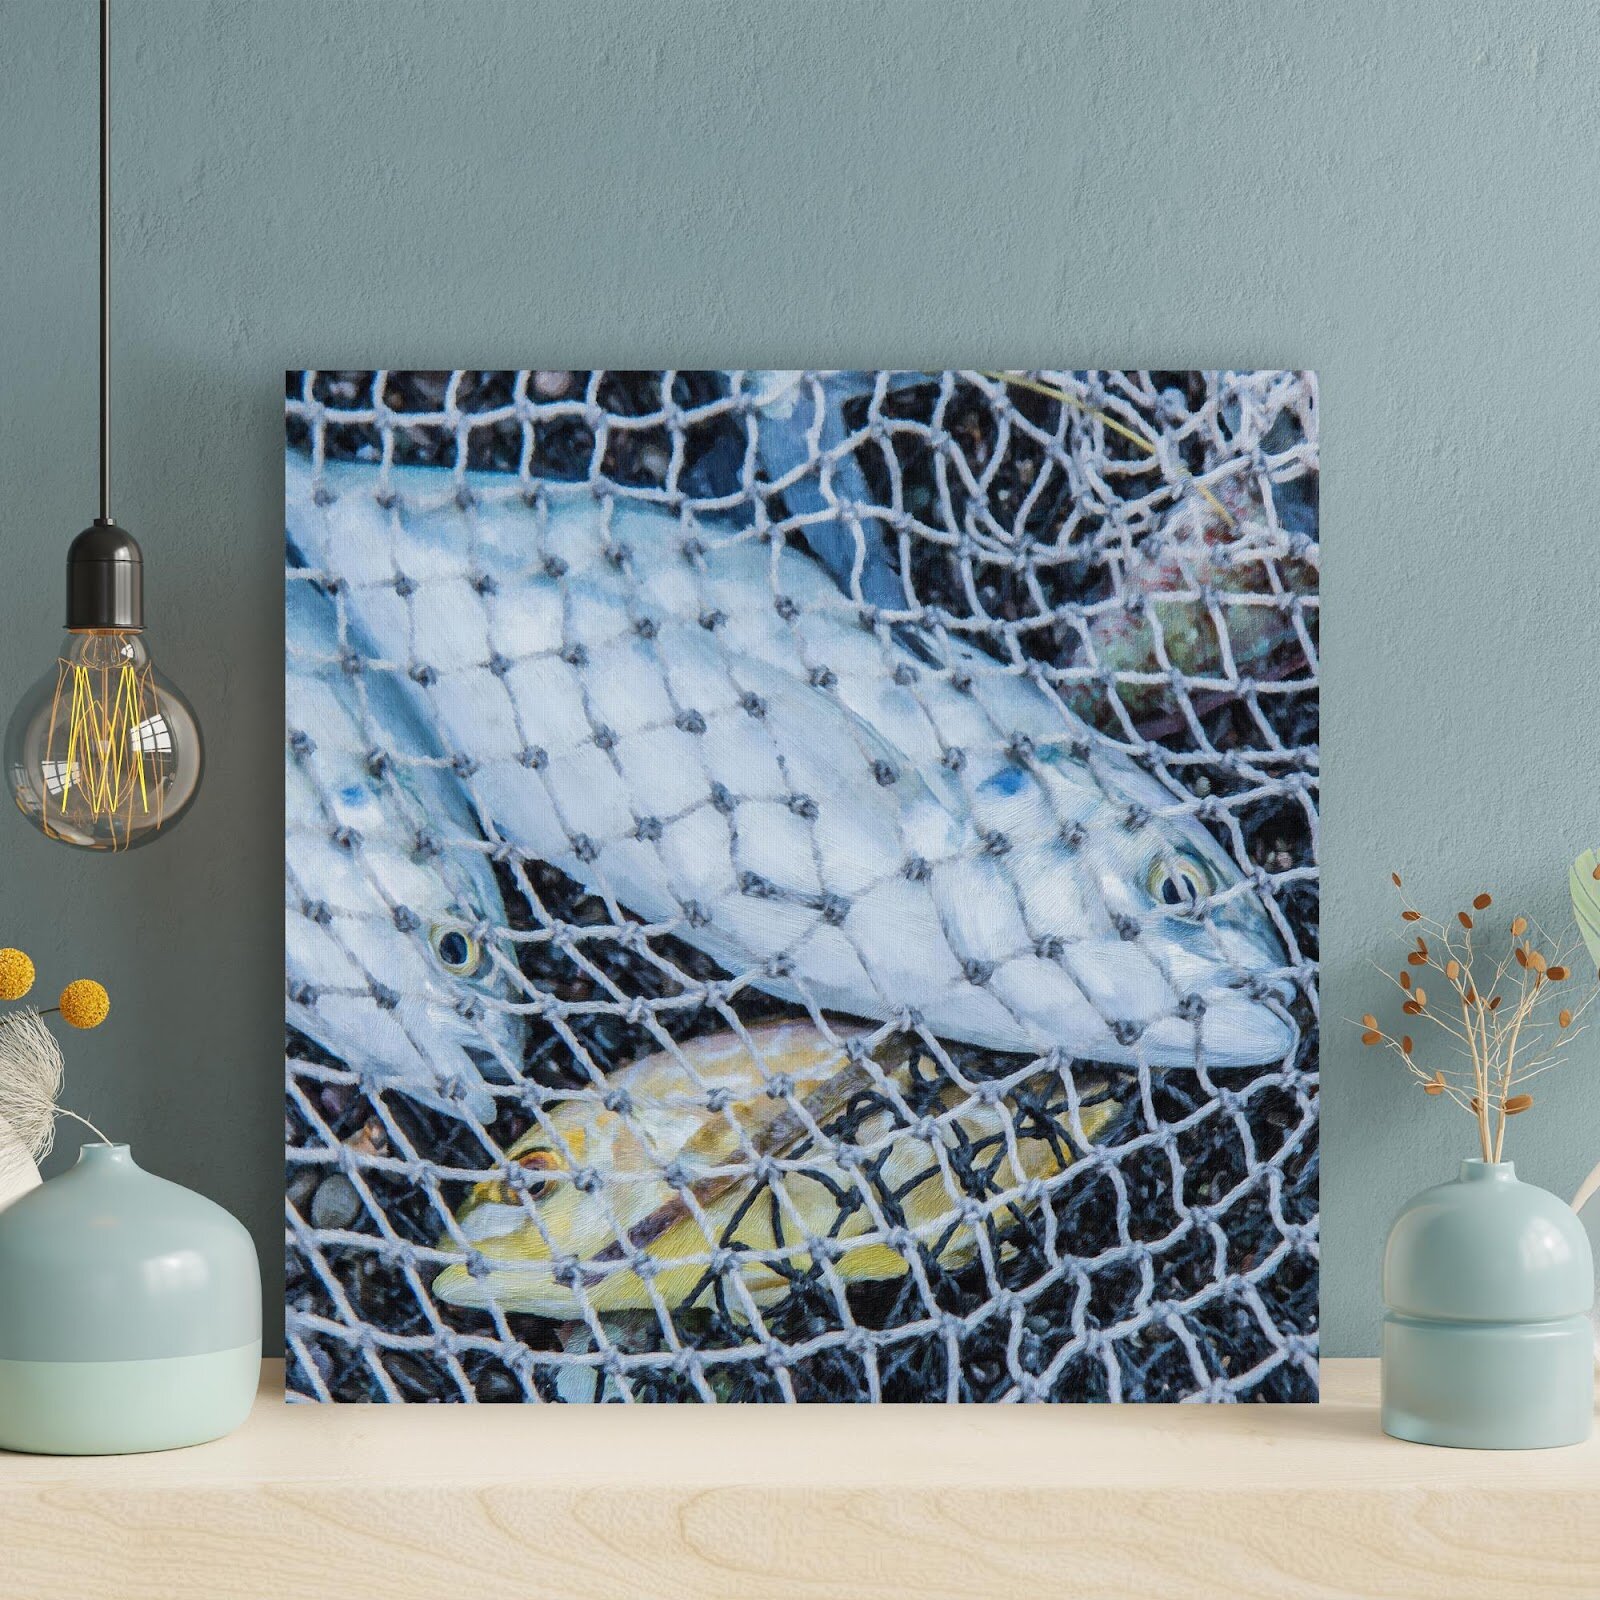 Some Fish in Fishing Net - 1 Piece Square Graphic Art Print On Wrapped Canvas Rosecliff Heights Size: 16 H x 16 W